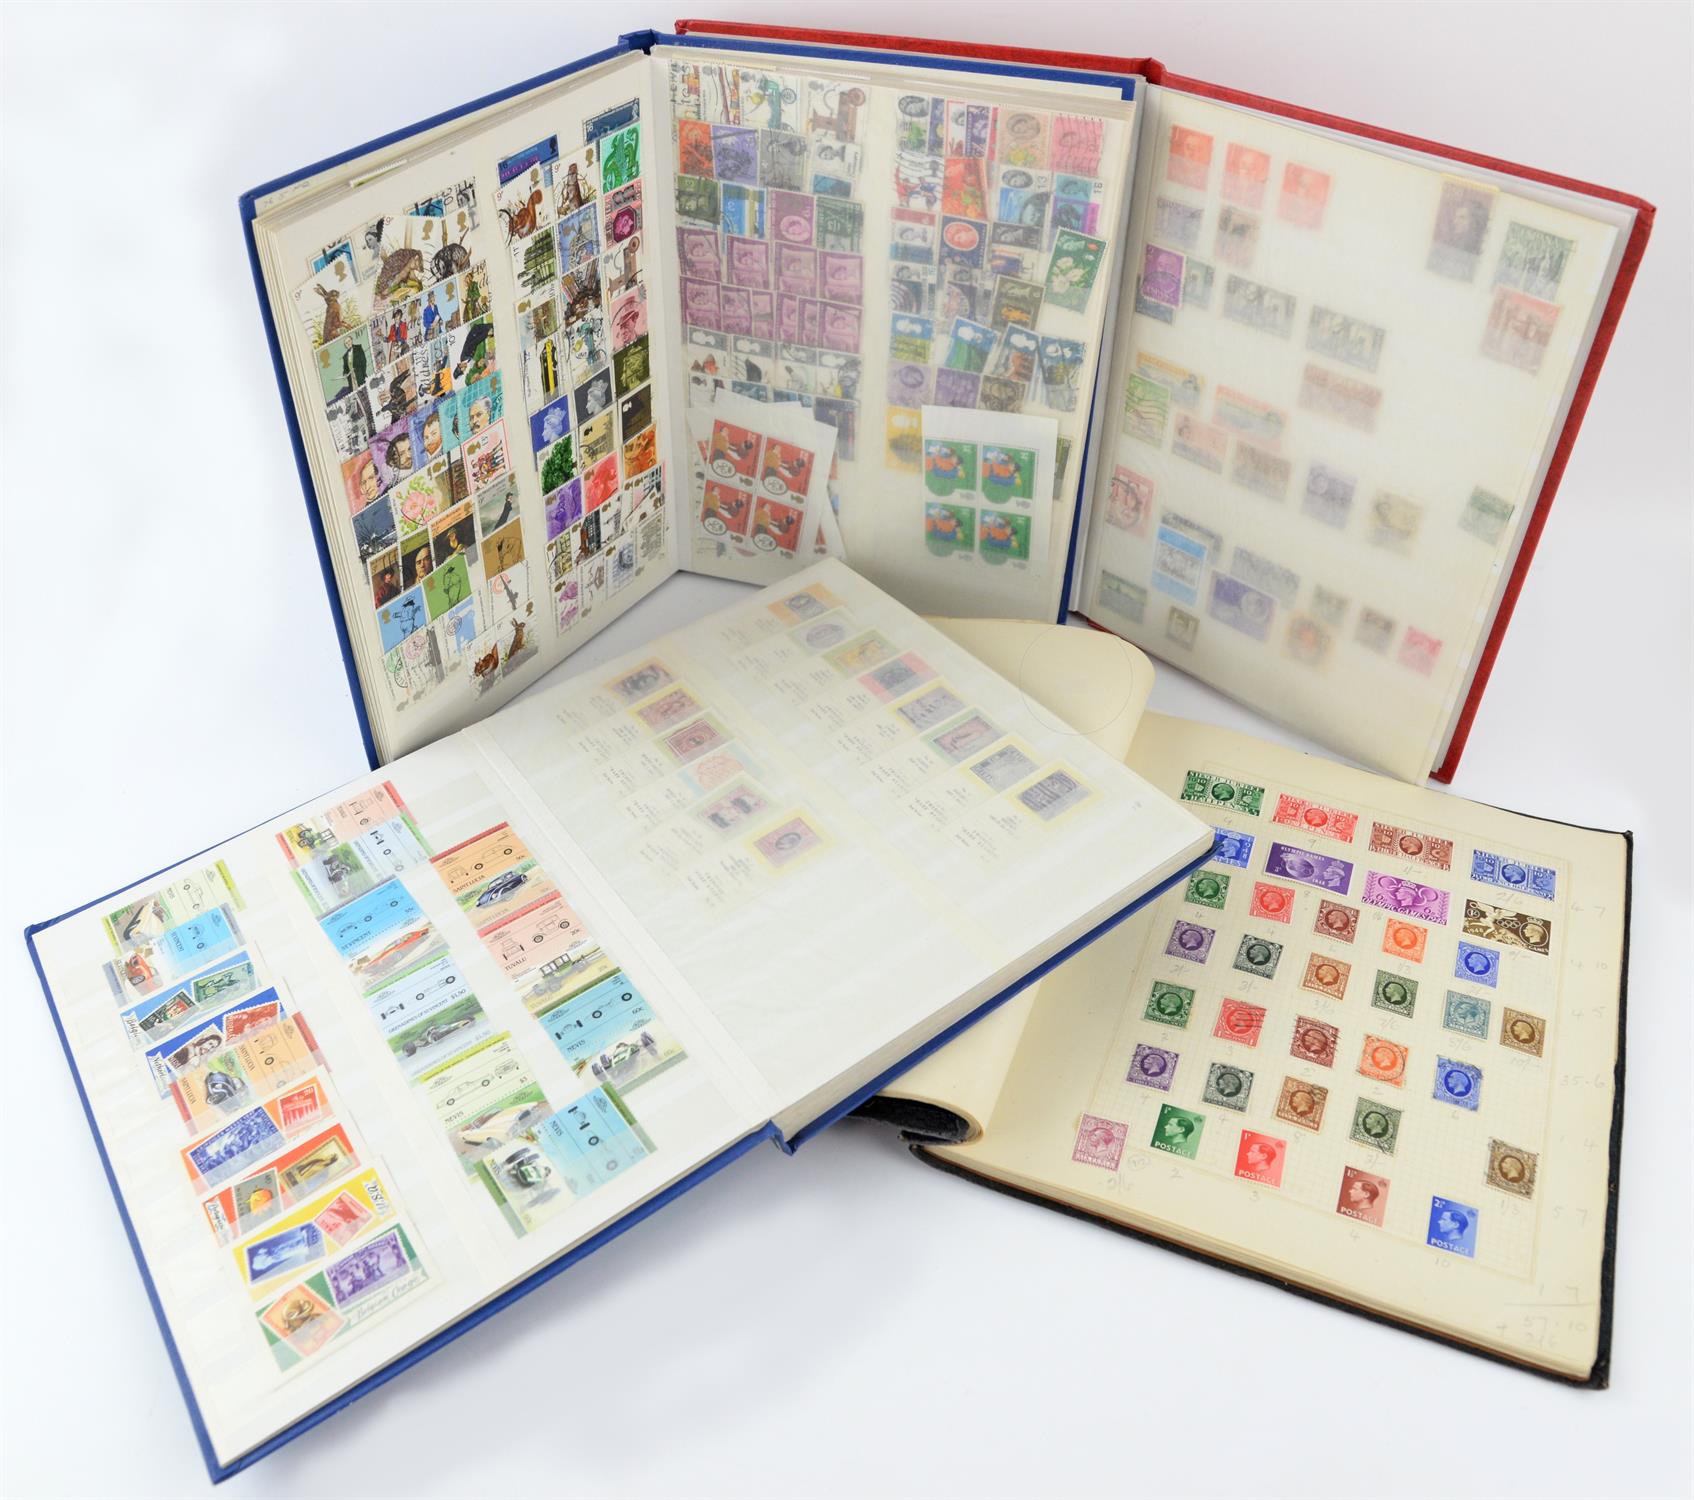 British Commonwealth Stamps in Album and Stock books(3) with Great Britain Decimal Issues, mint,